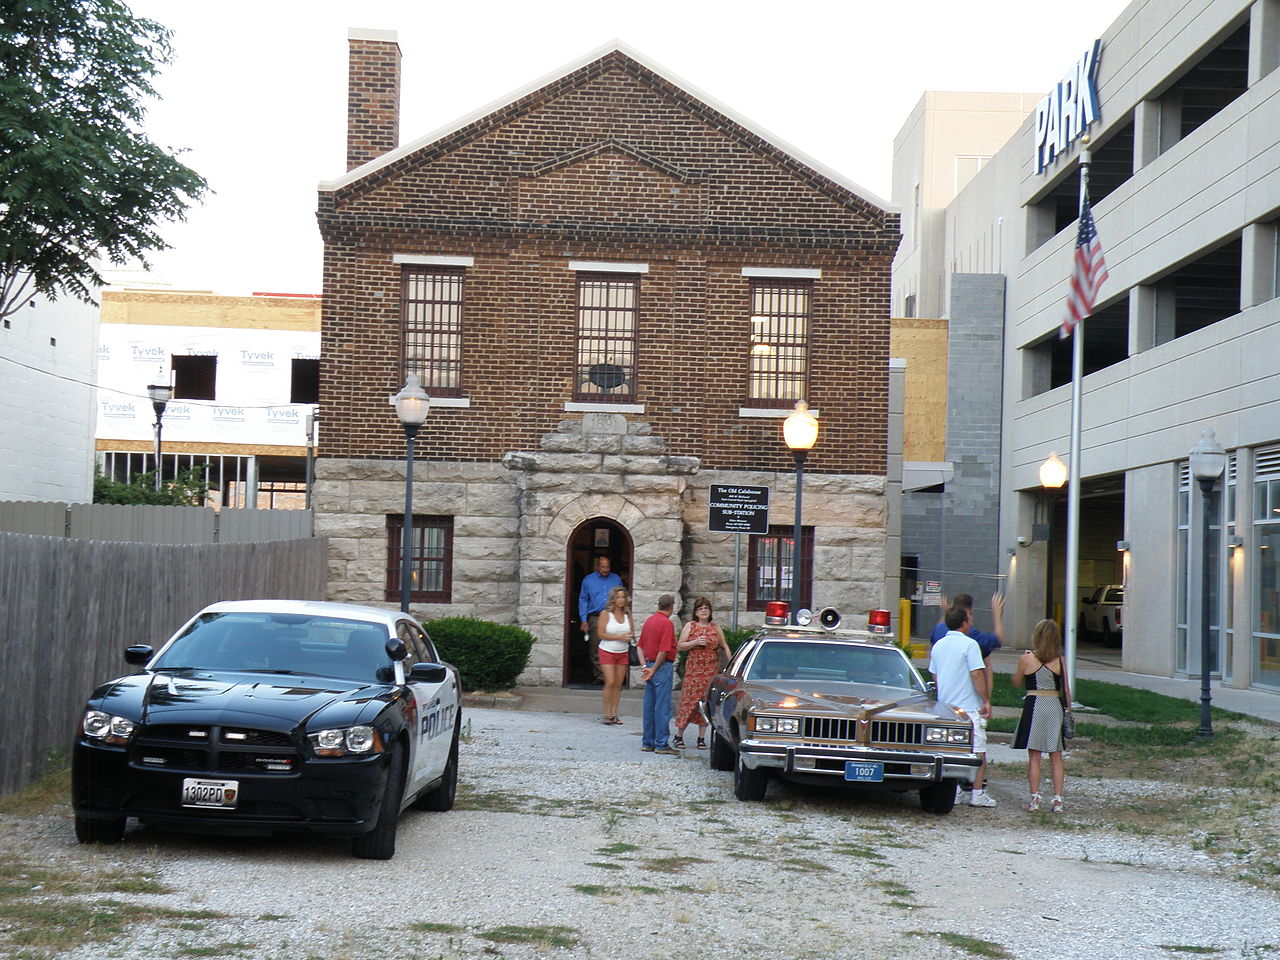 The Calaboose, also known as the Old Springfield Jail, was built in 1891.